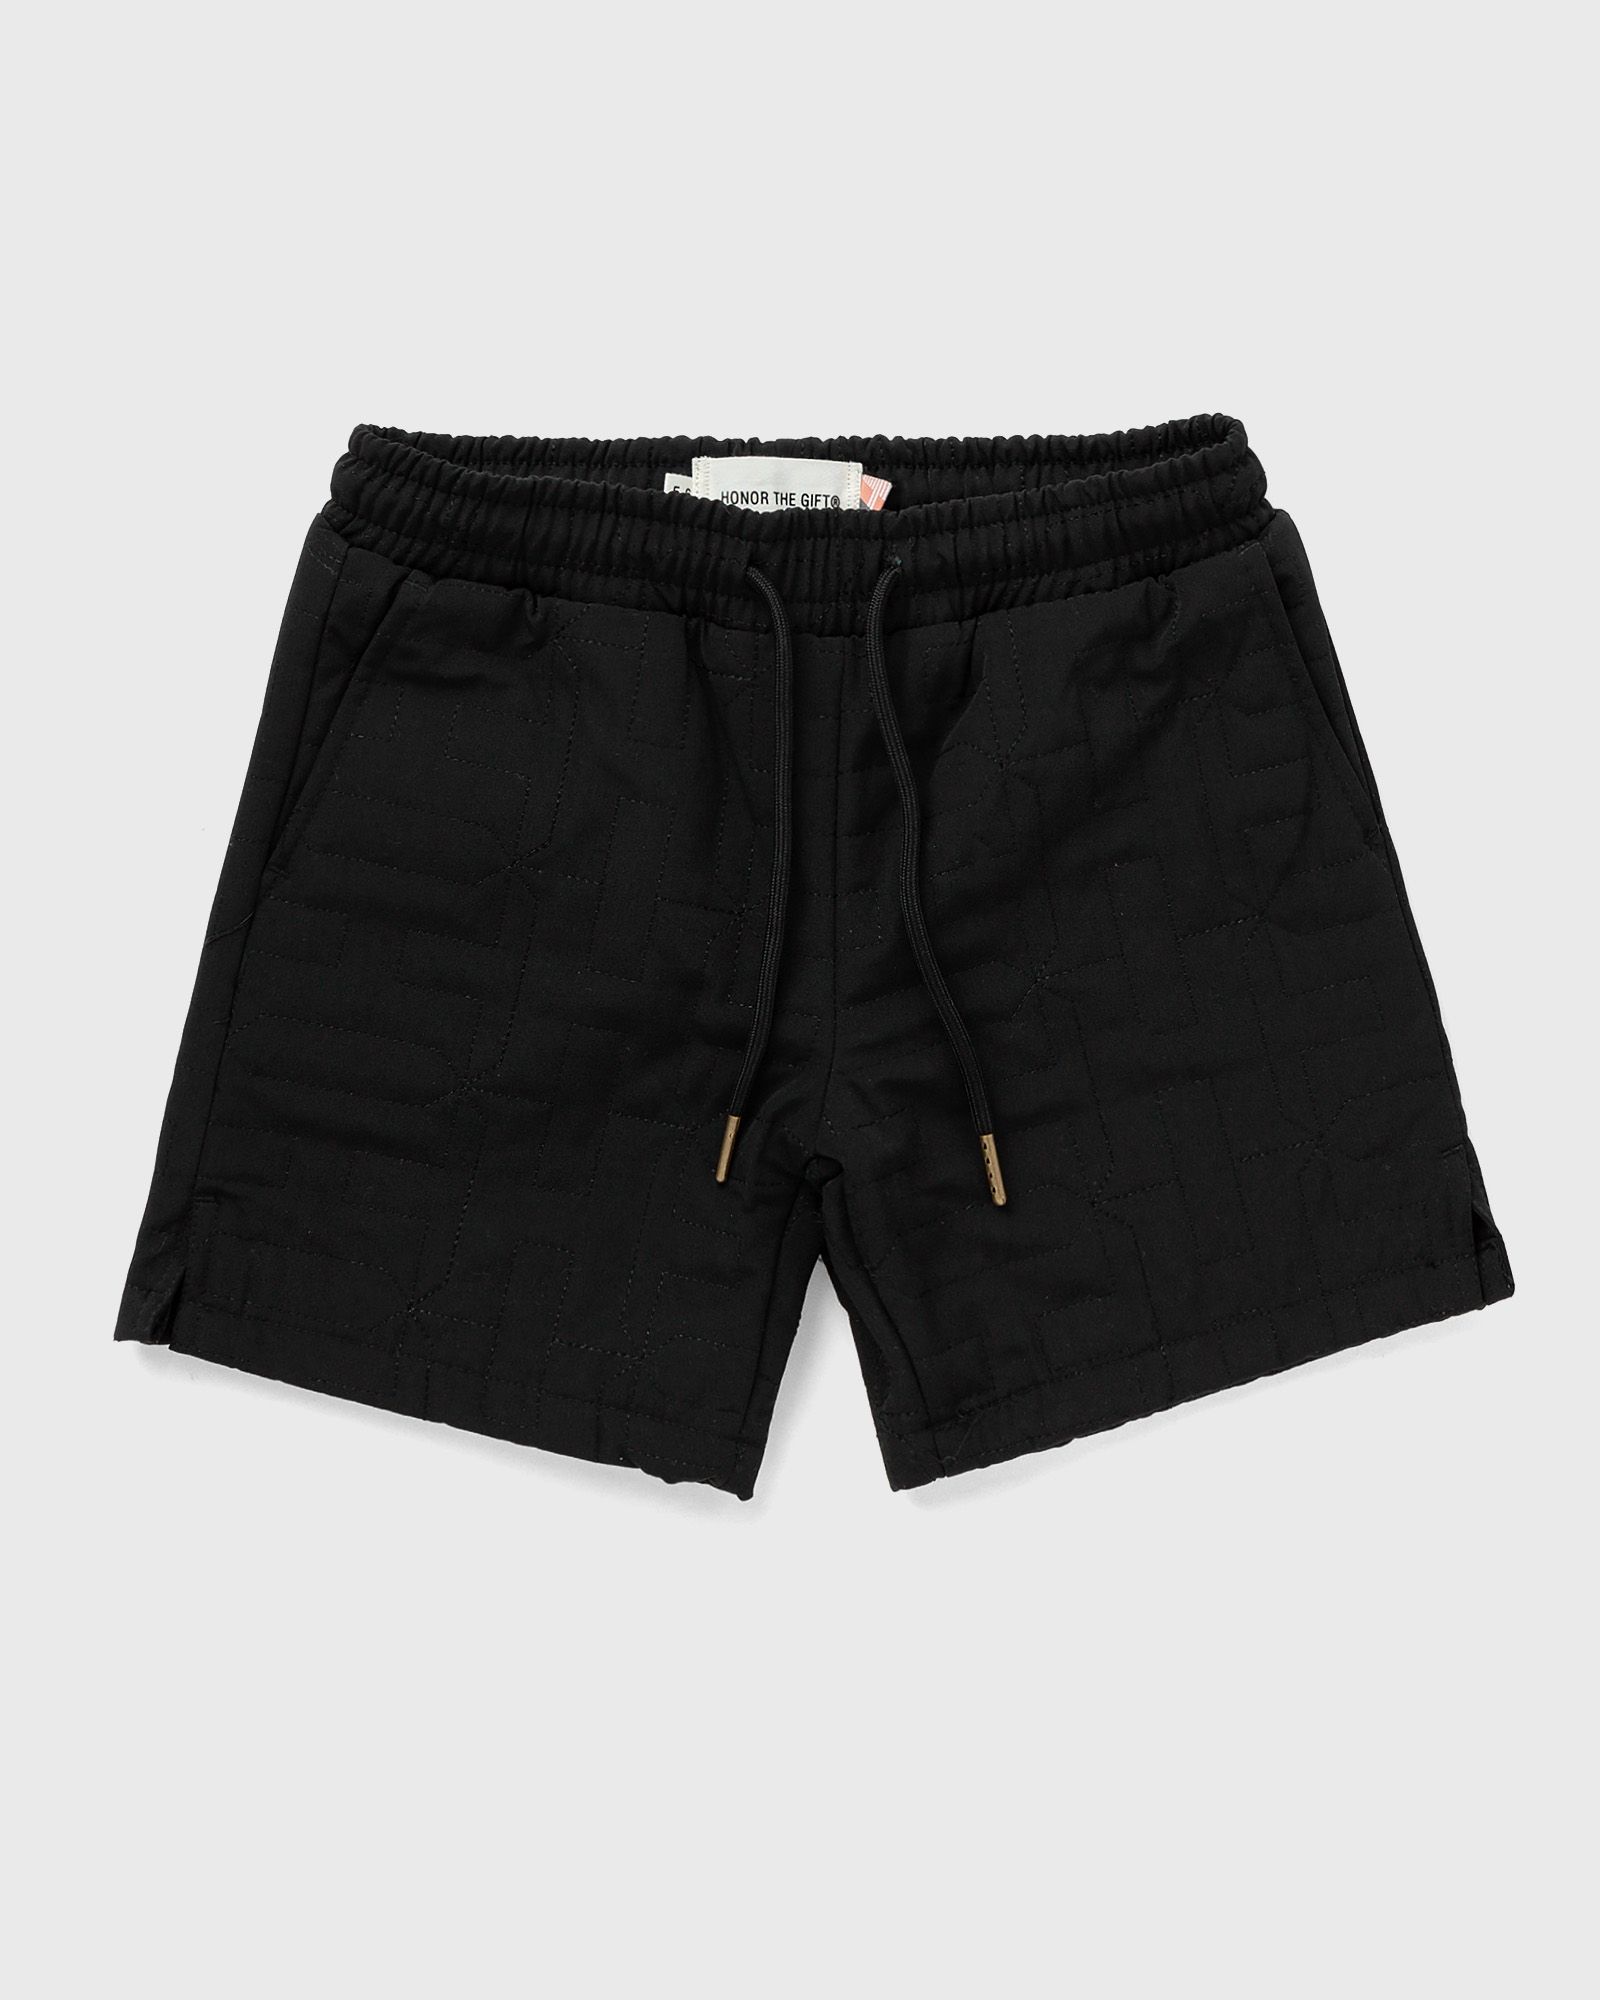 Honor The Gift - nylon quilted shorts  shorts black in größe:age 2-4 | eu 92-104